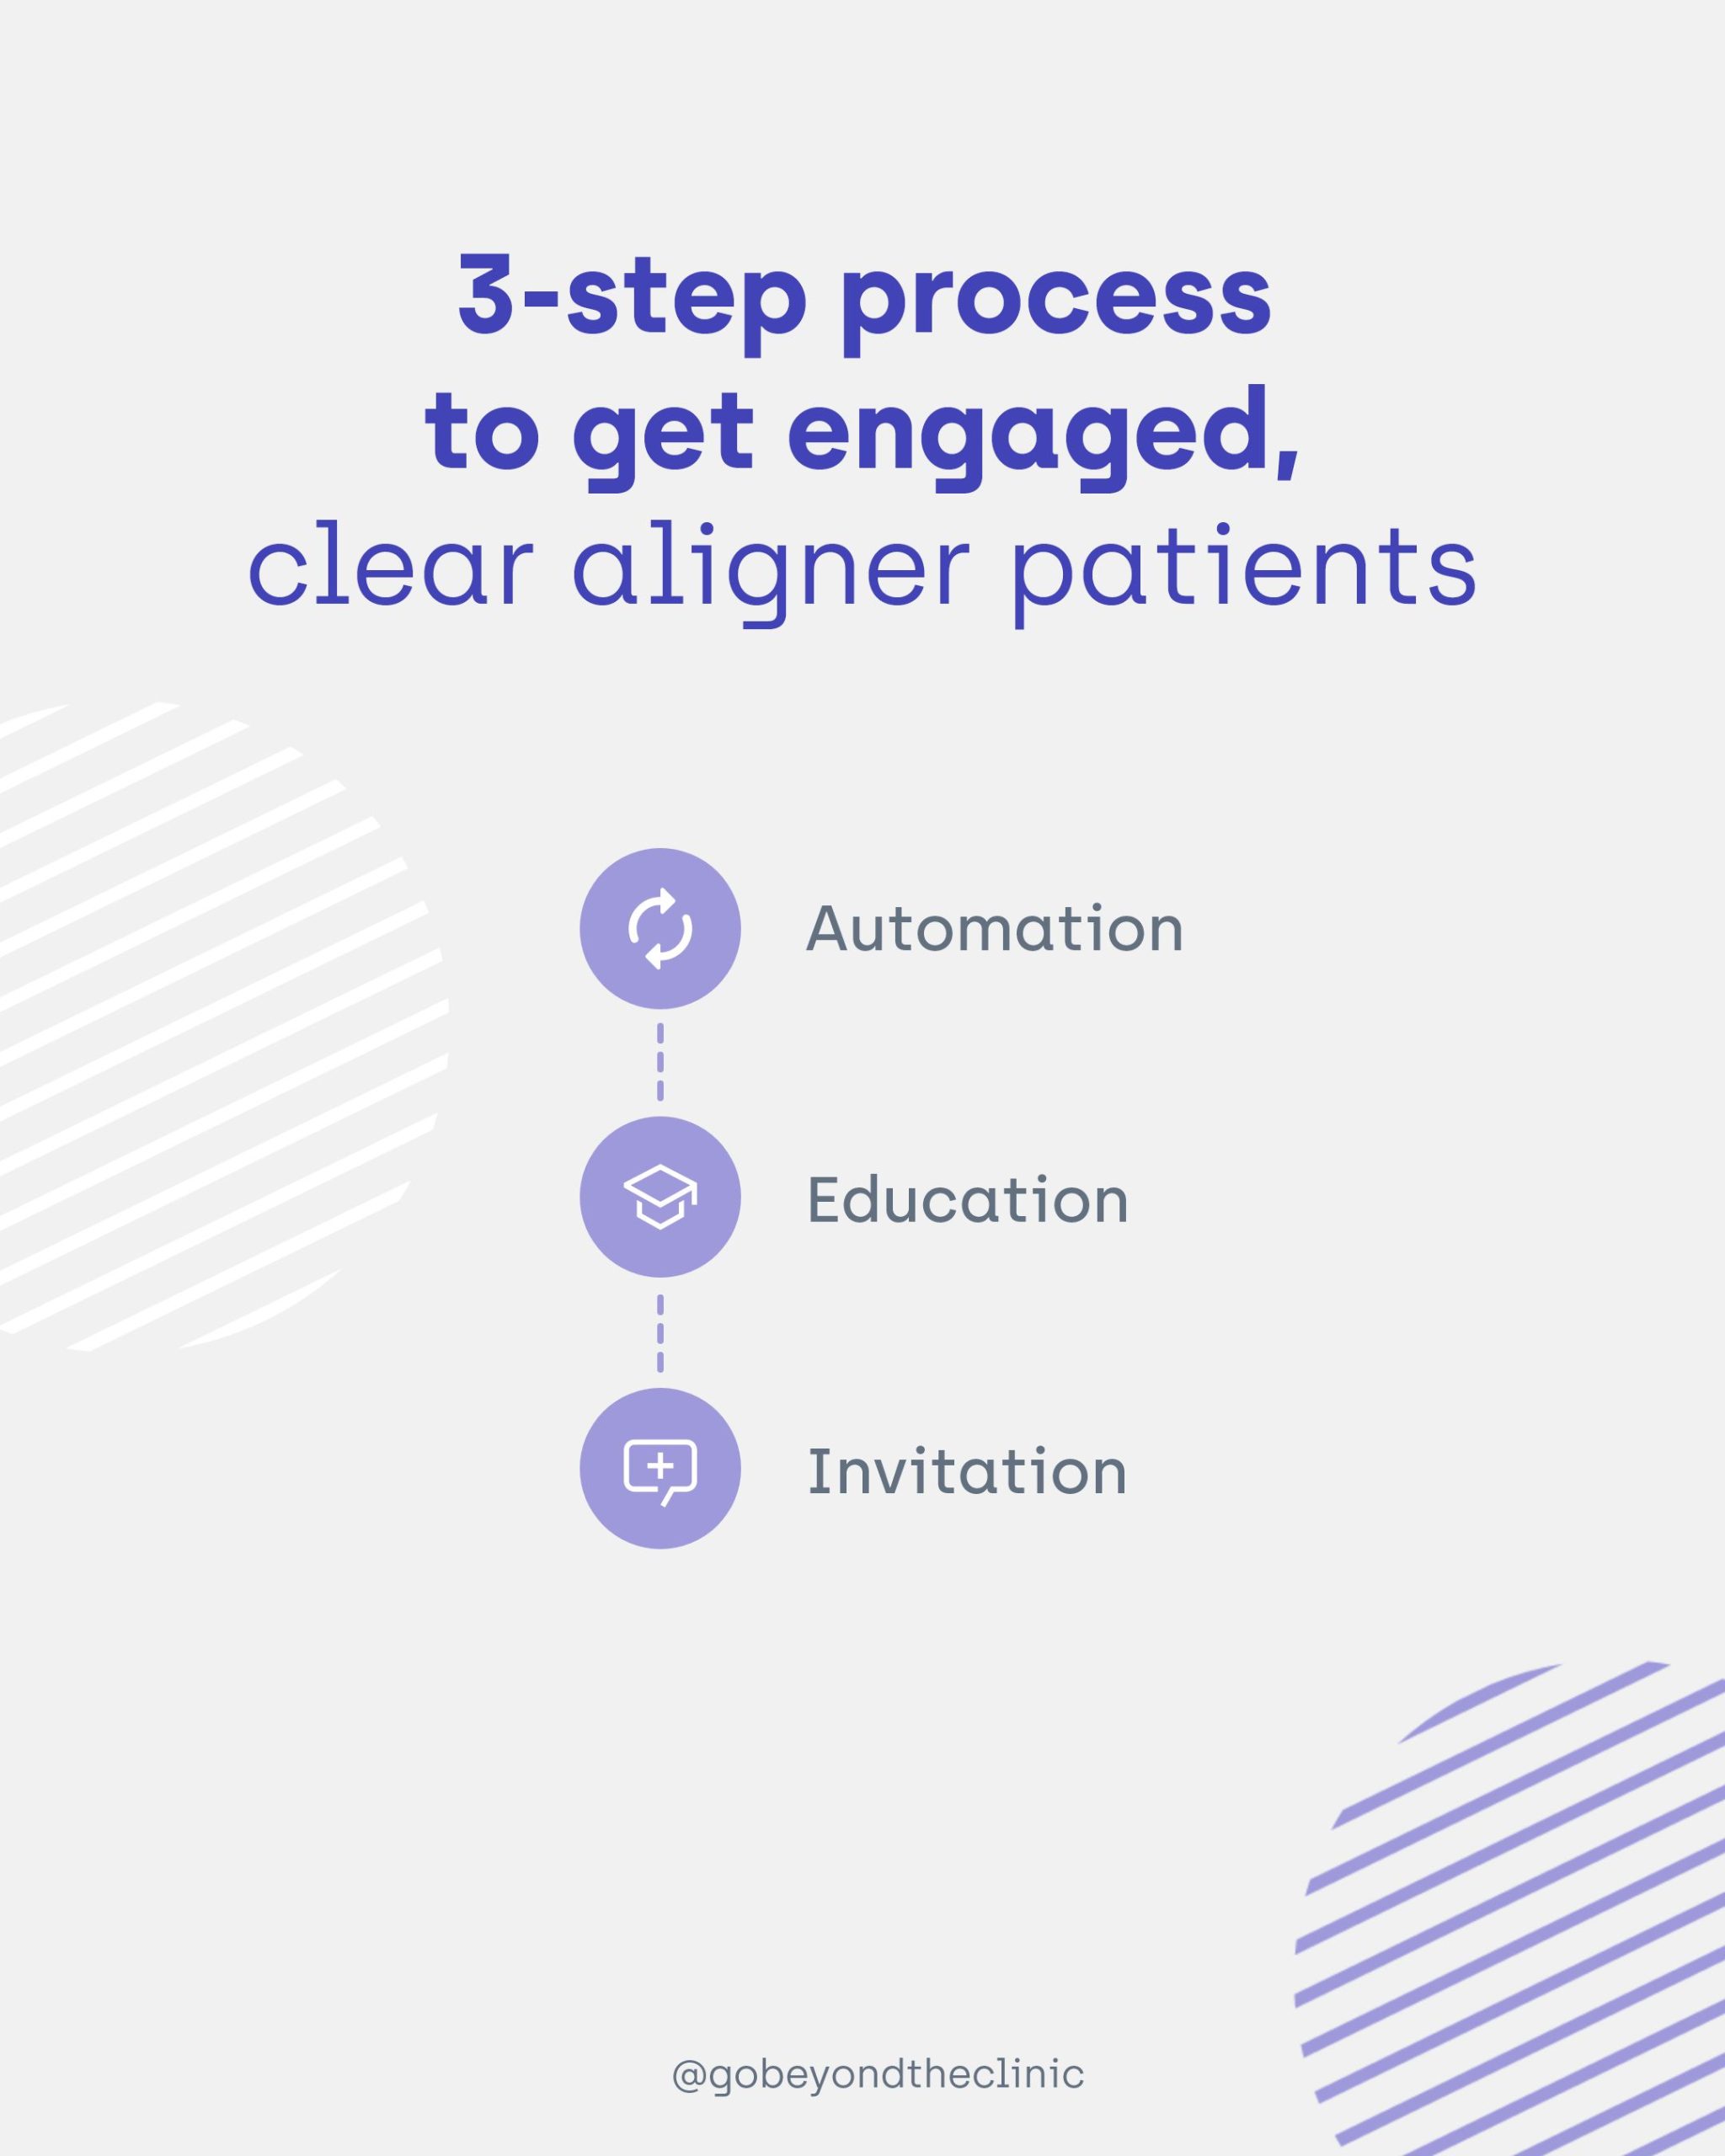 3-step-process-for-engaged-aligner-patients